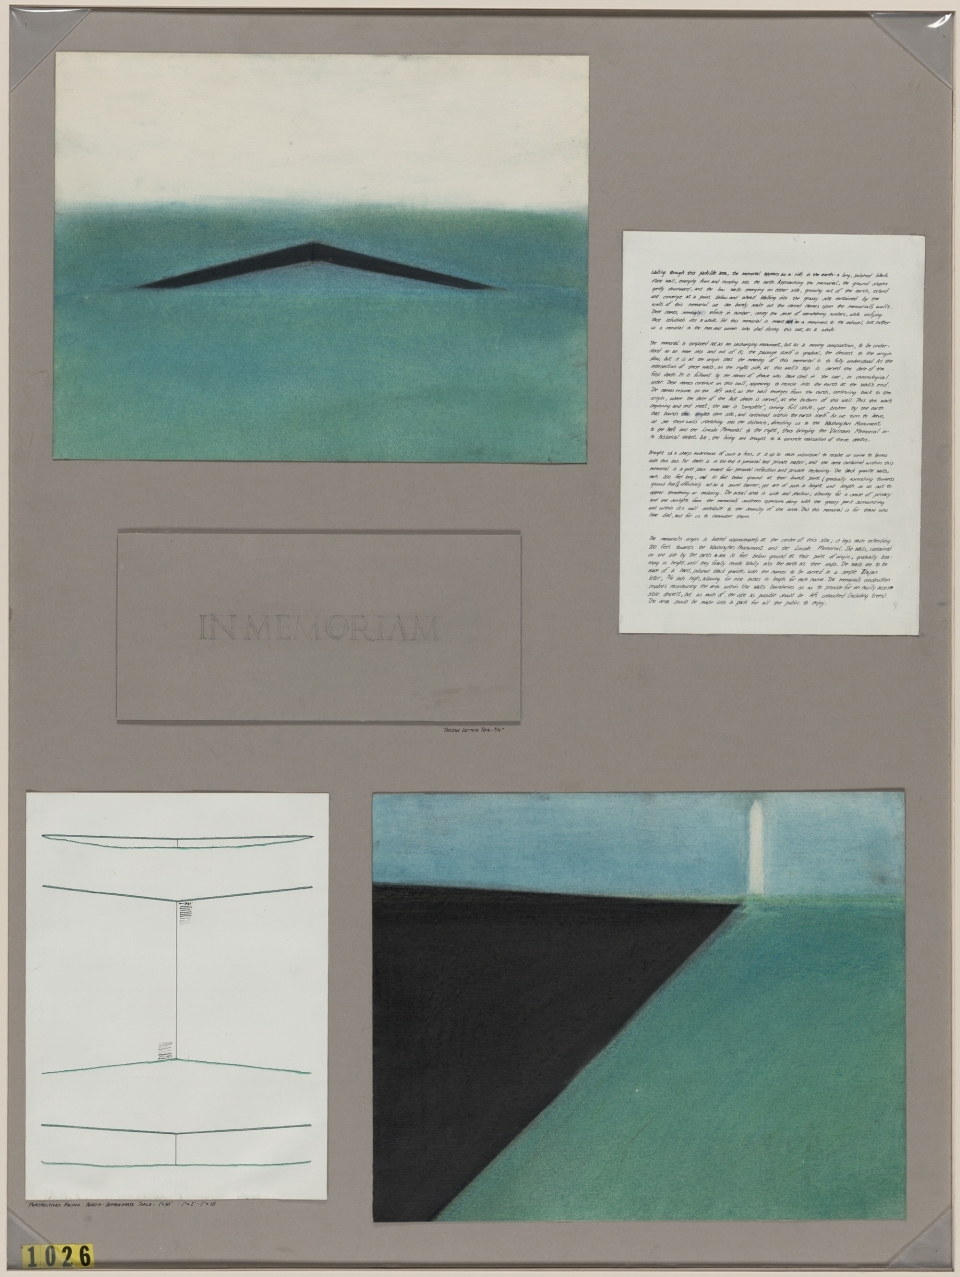 A collage of the memorial’s architectural drawings and Maya Lin’s one-page written summary on her concept.